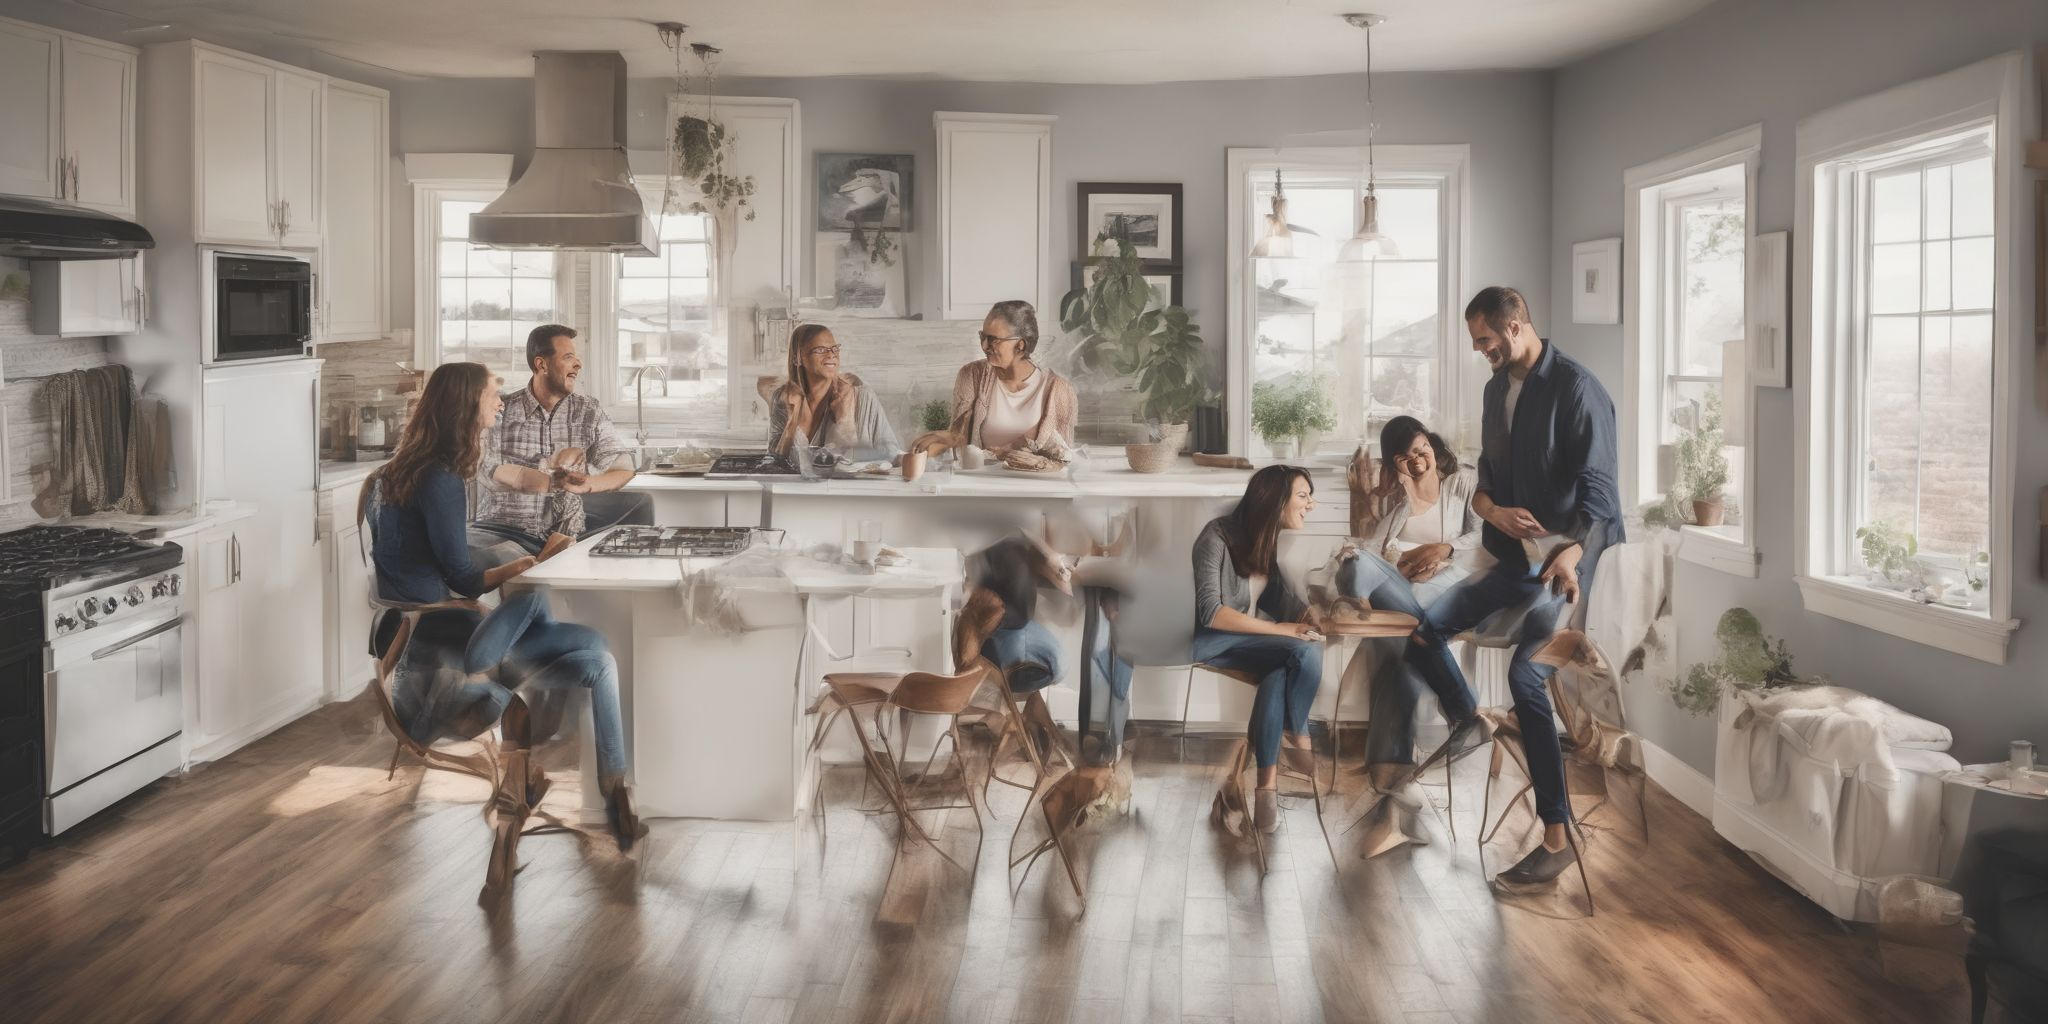 Homebuyers  in realistic, photographic style